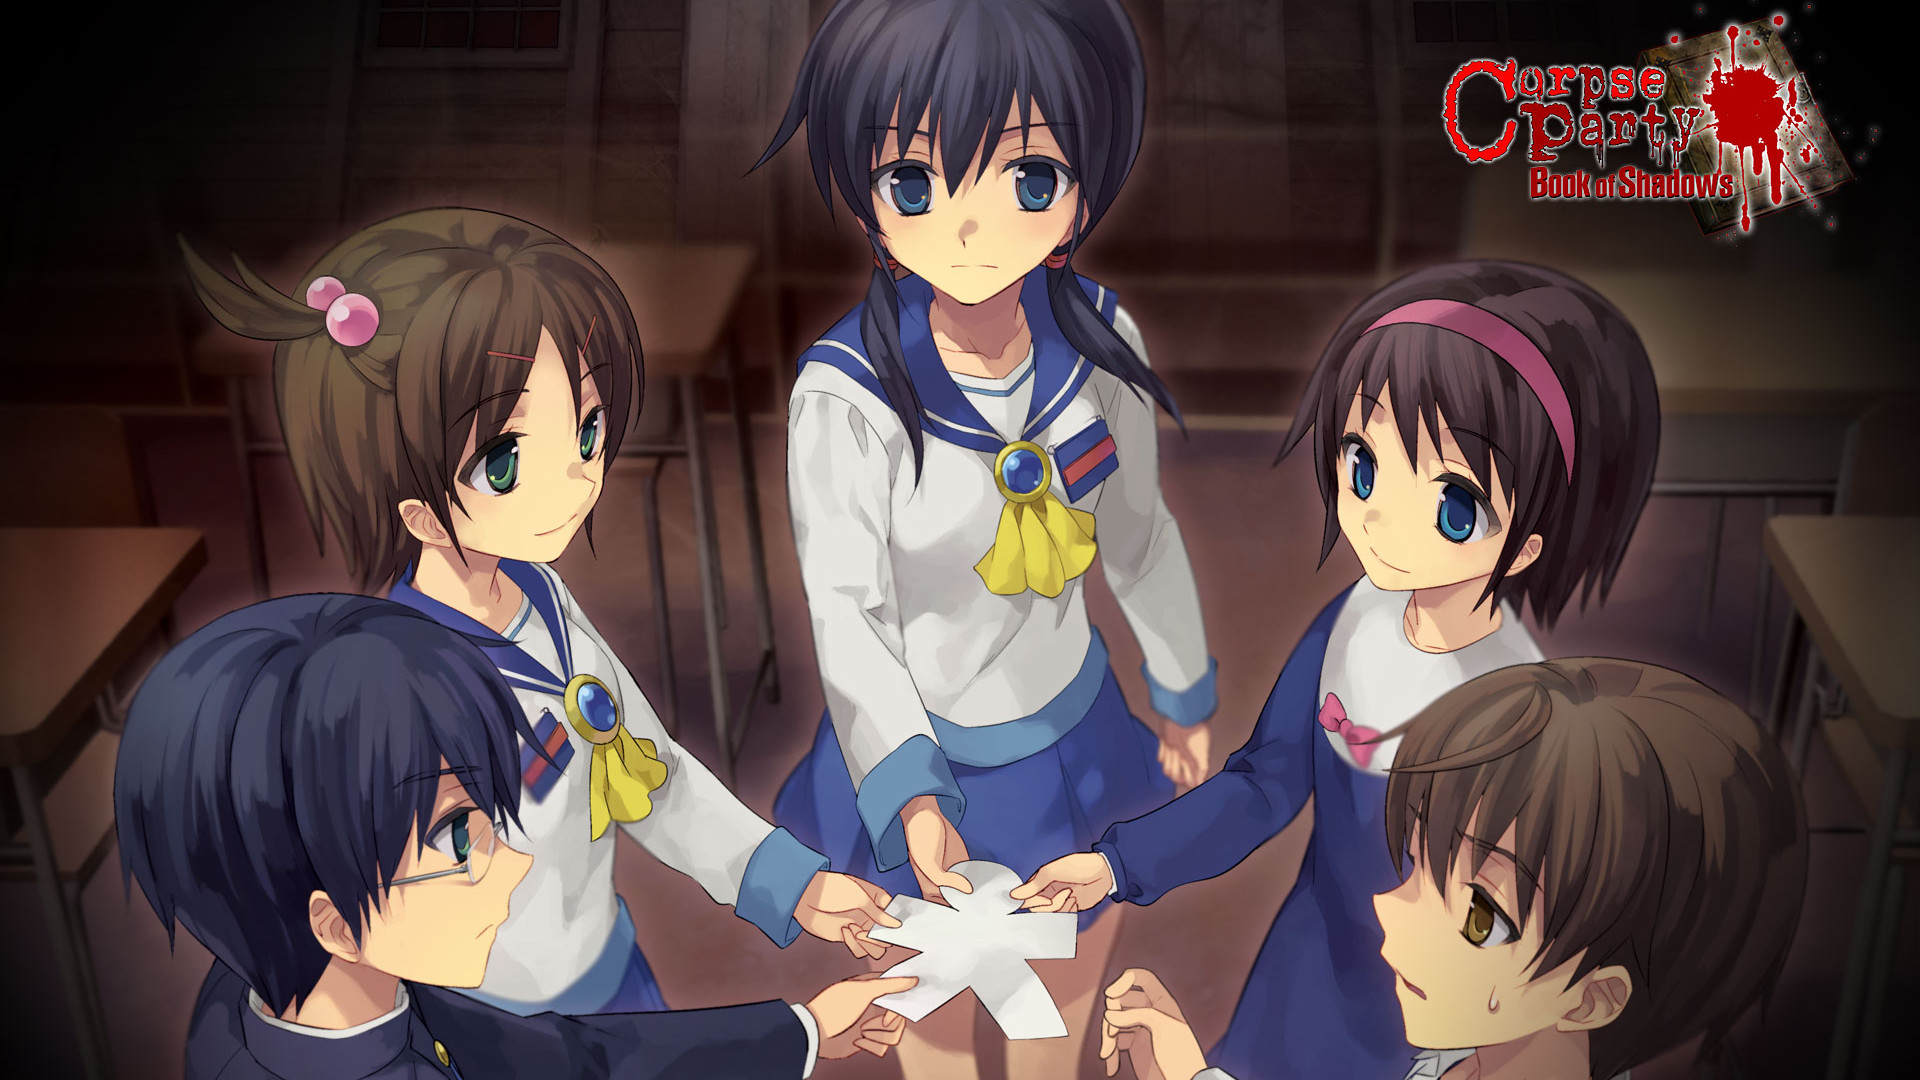 10+ Corpse Party HD Wallpapers and Backgrounds